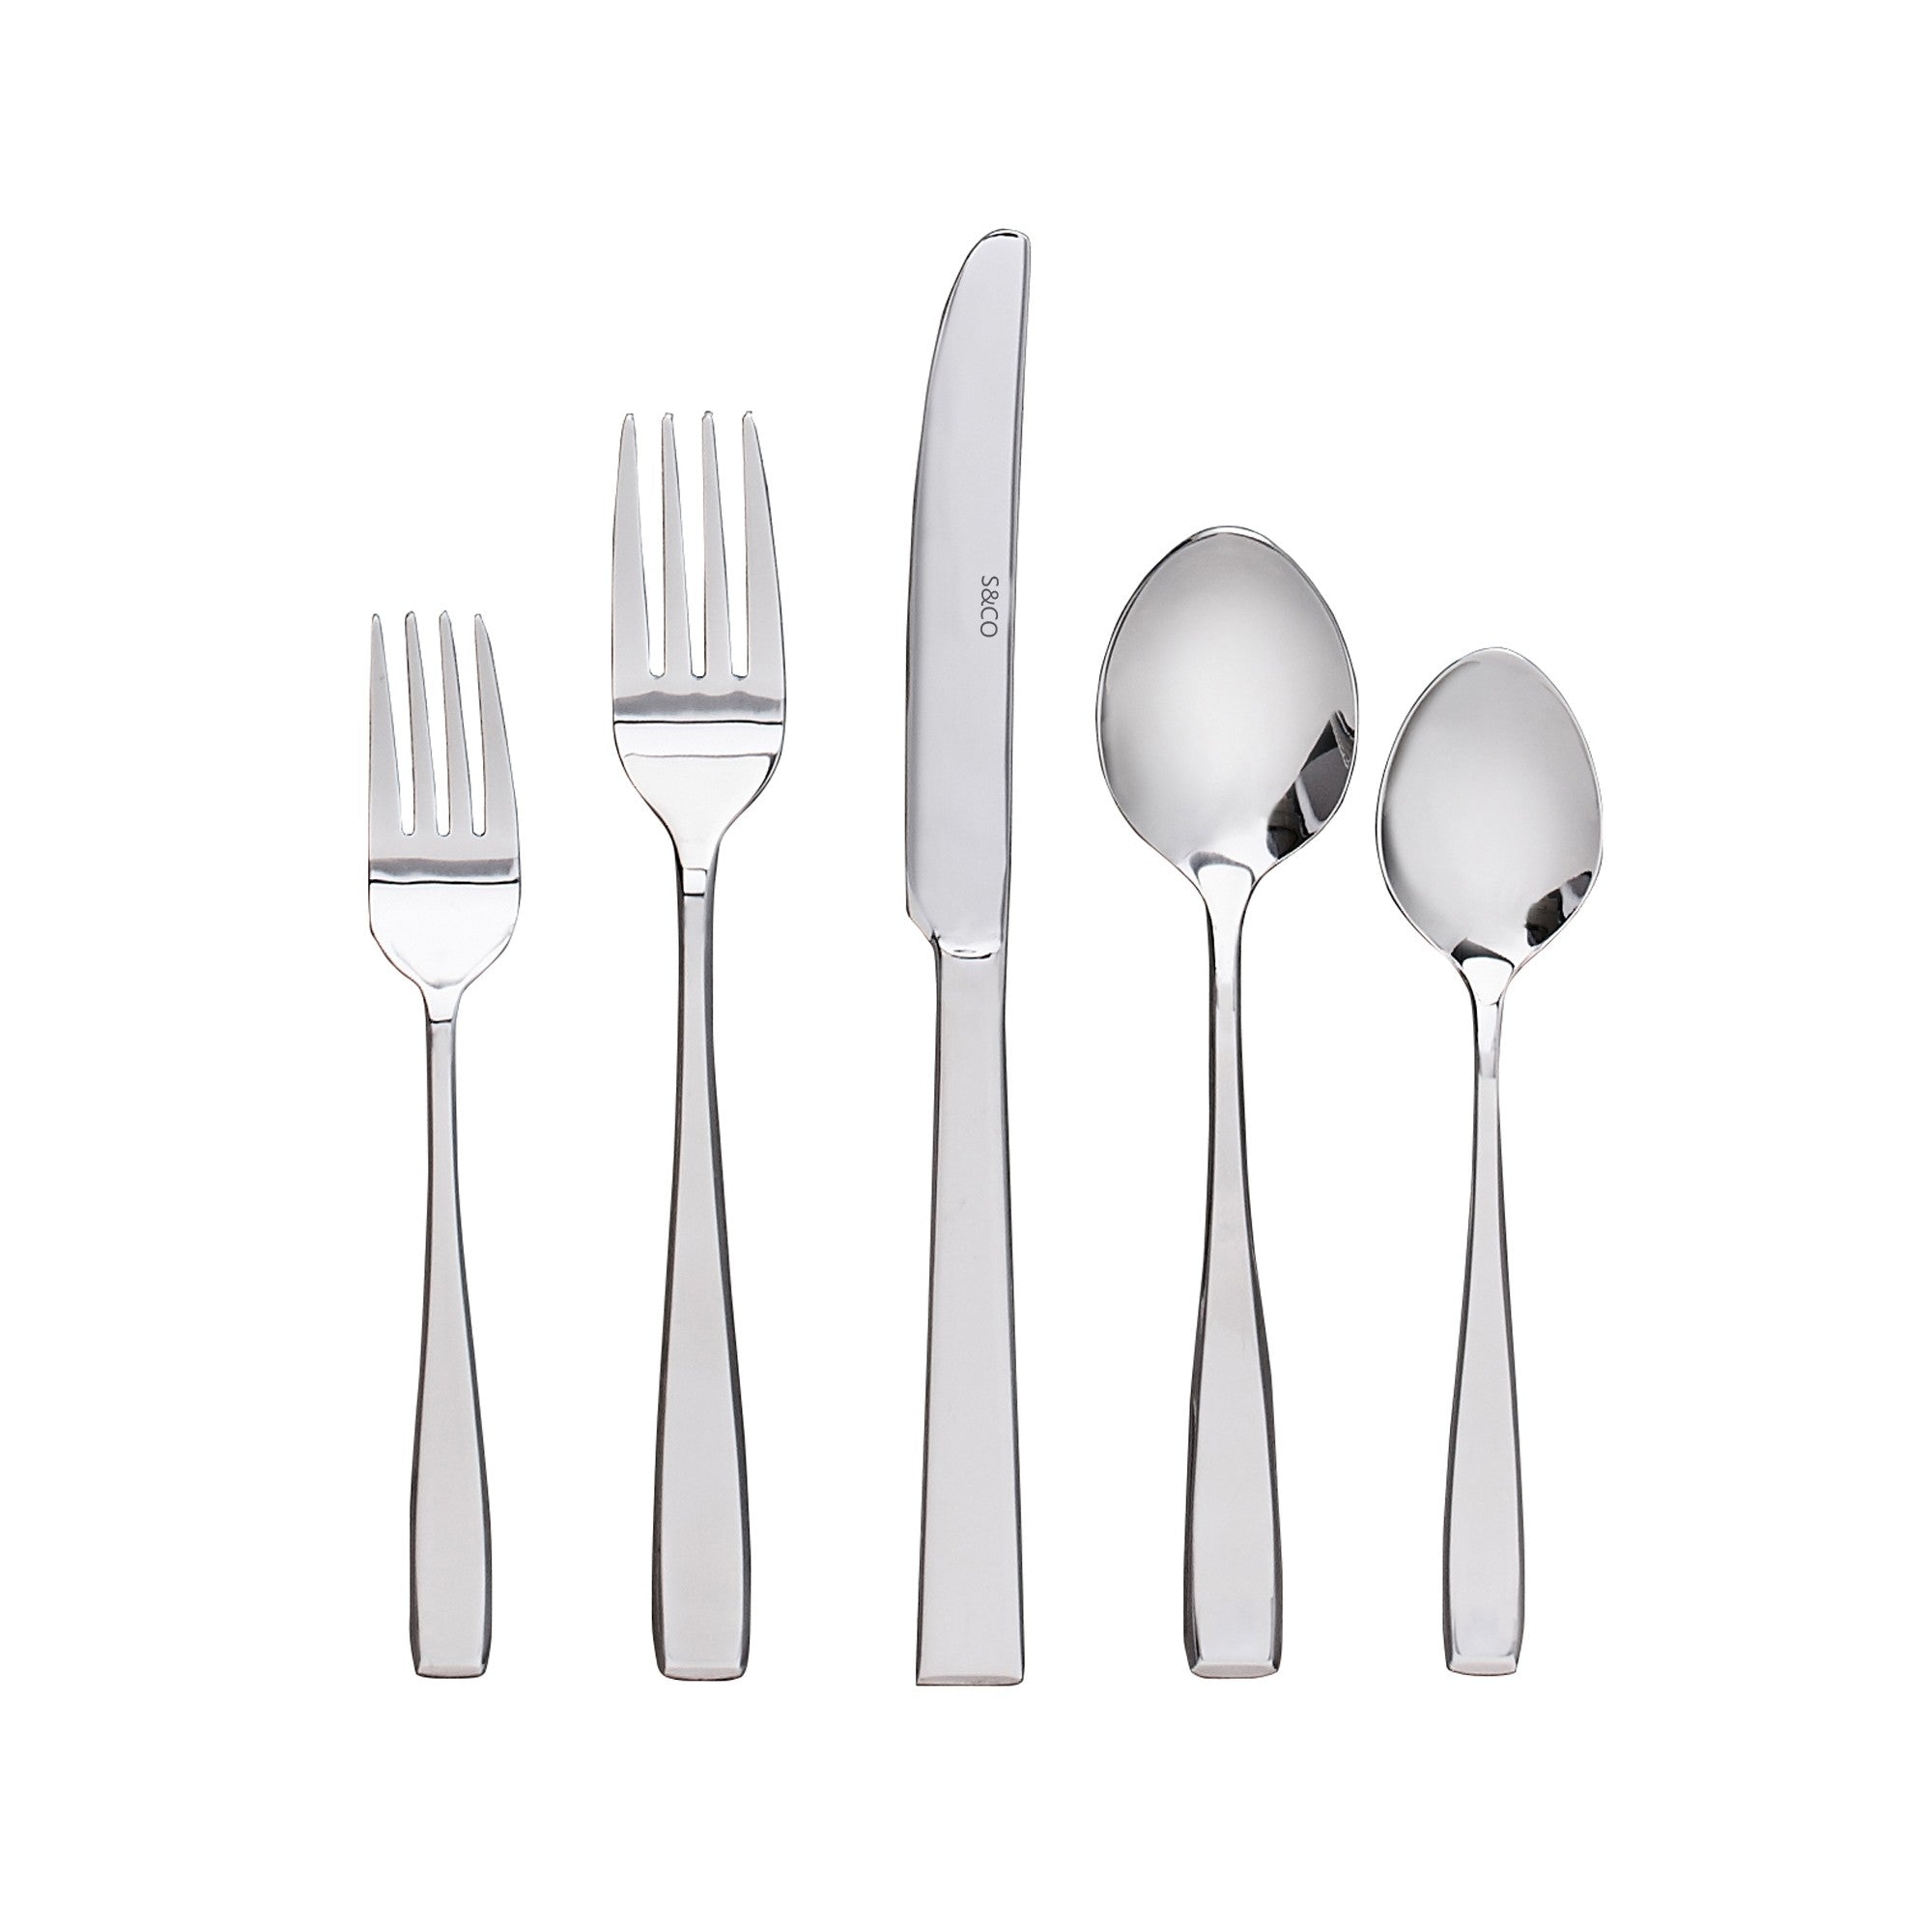 title:Safdie & Co. Flatware Stainless Steel Gourmet 20PC Set Nice;color:Silver